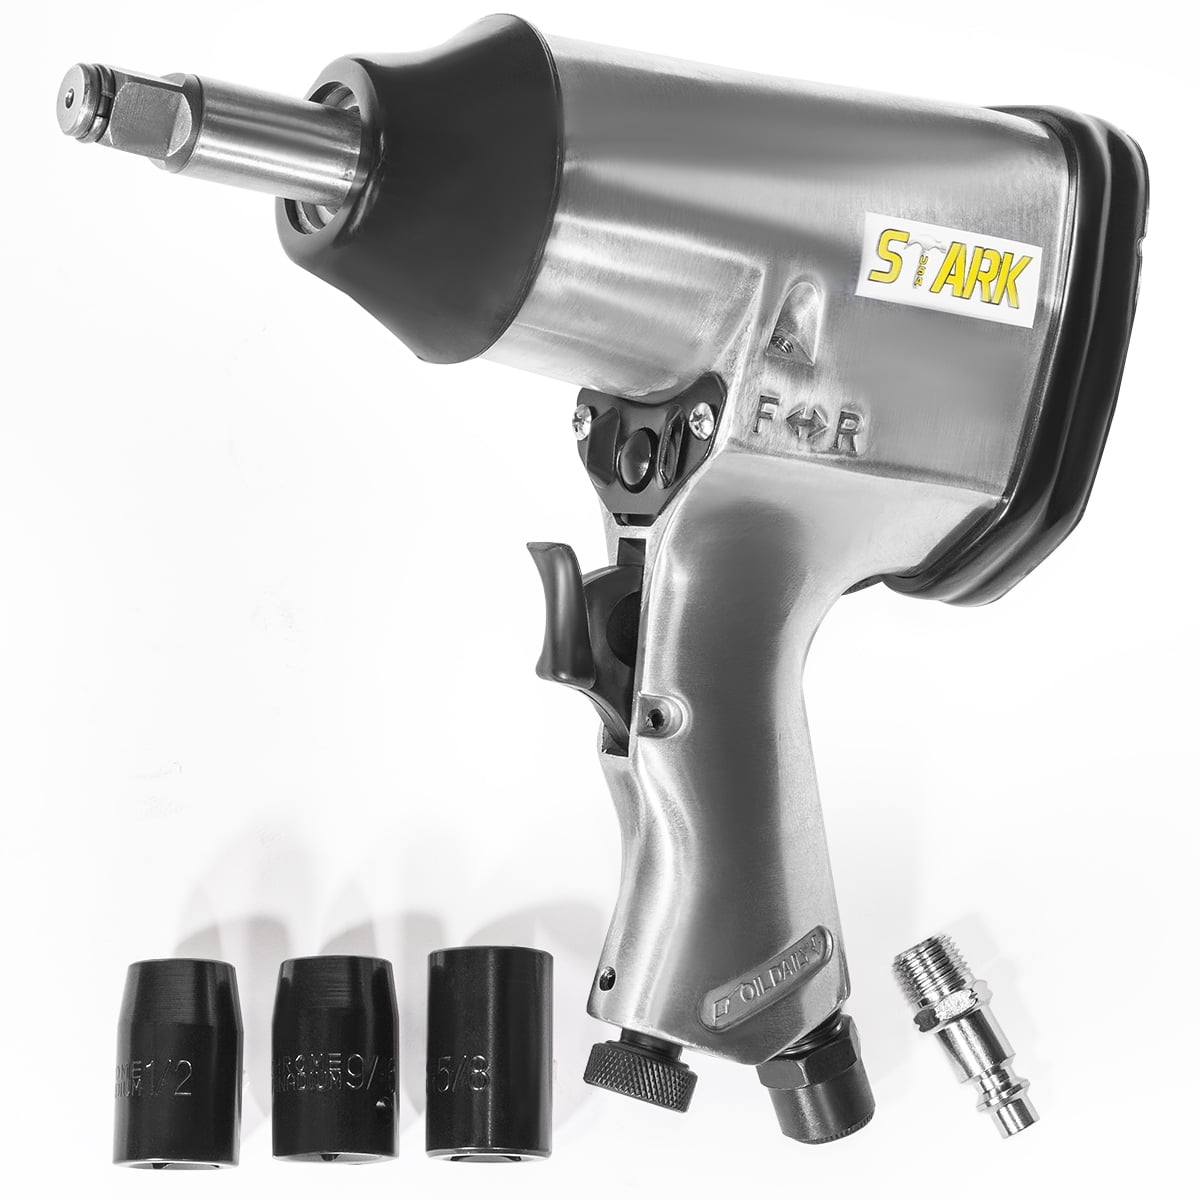 4 Sockets Drive and Carrying Case 1/2" Electric Impact Wrench Anvil Set with 